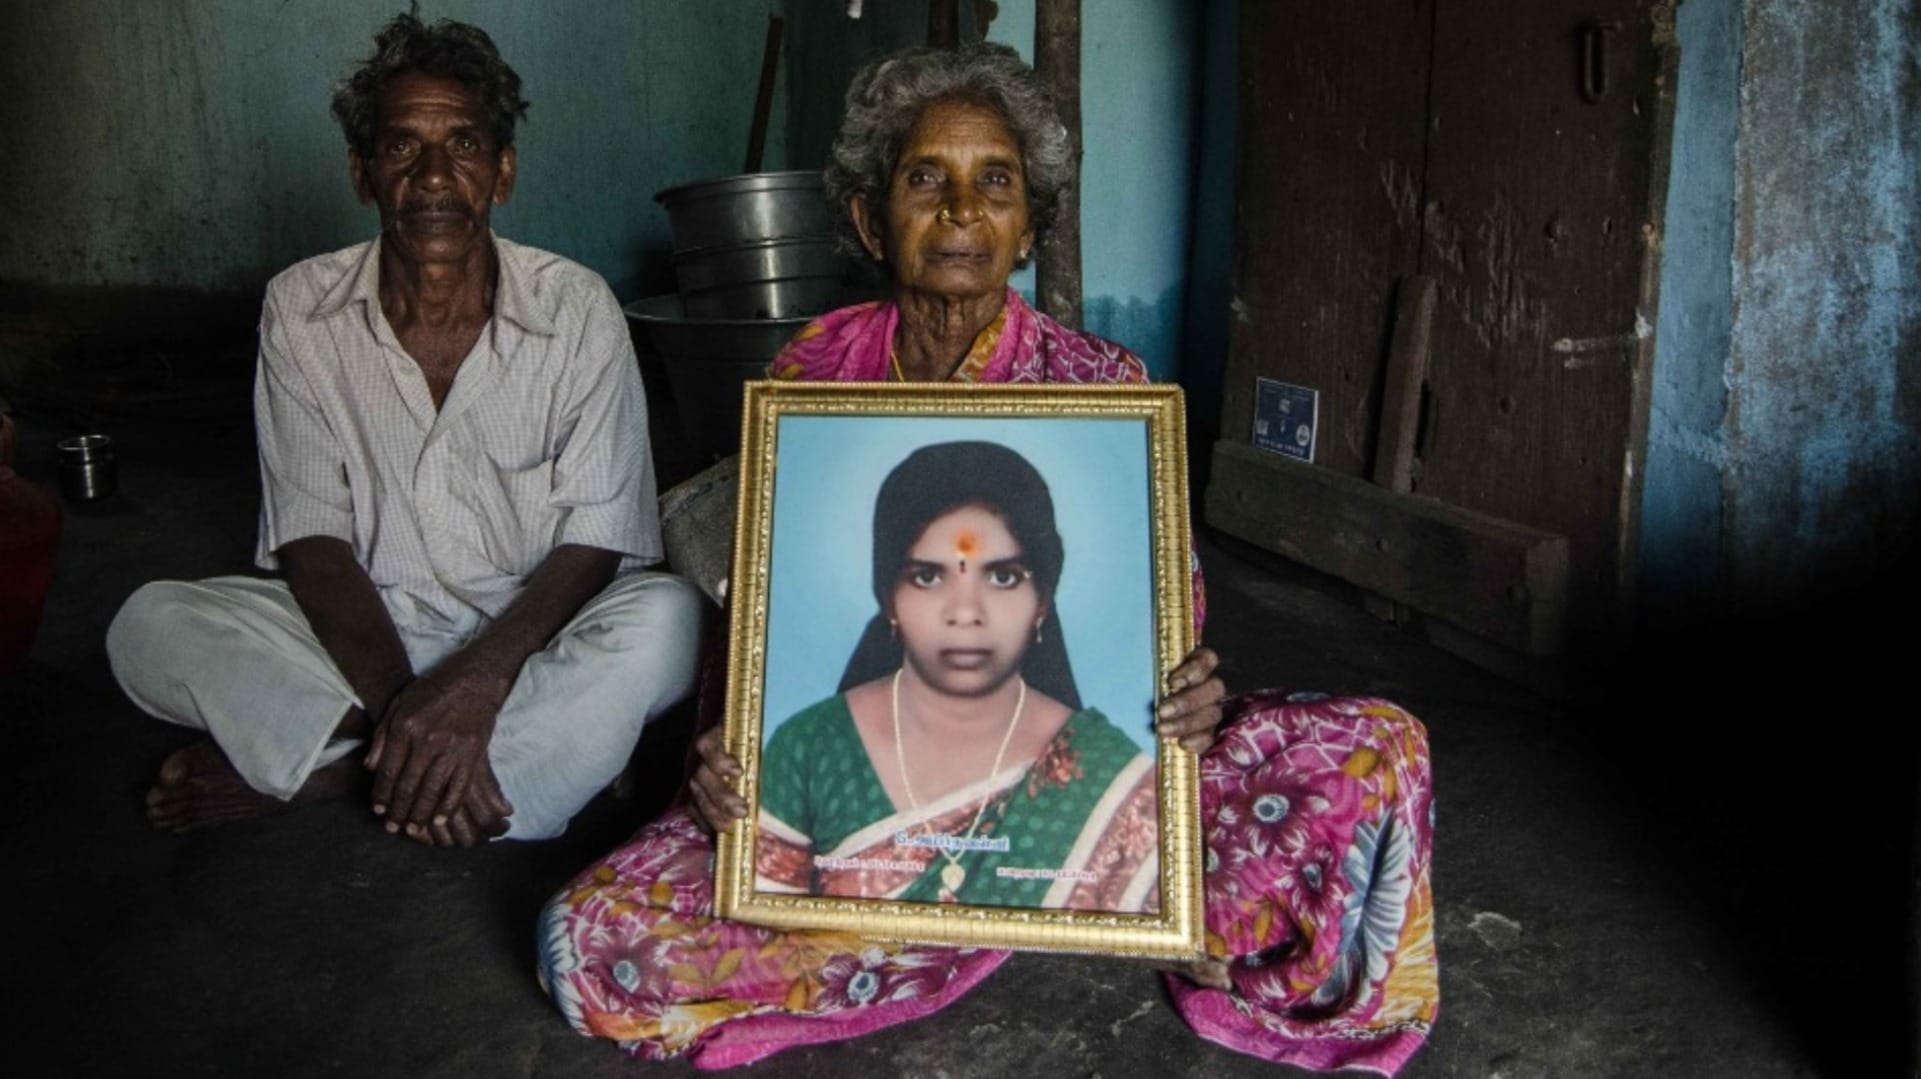 In Tamil Nadu, anatomy of a caste crime: Families devastated by honour killings speak of the scourge